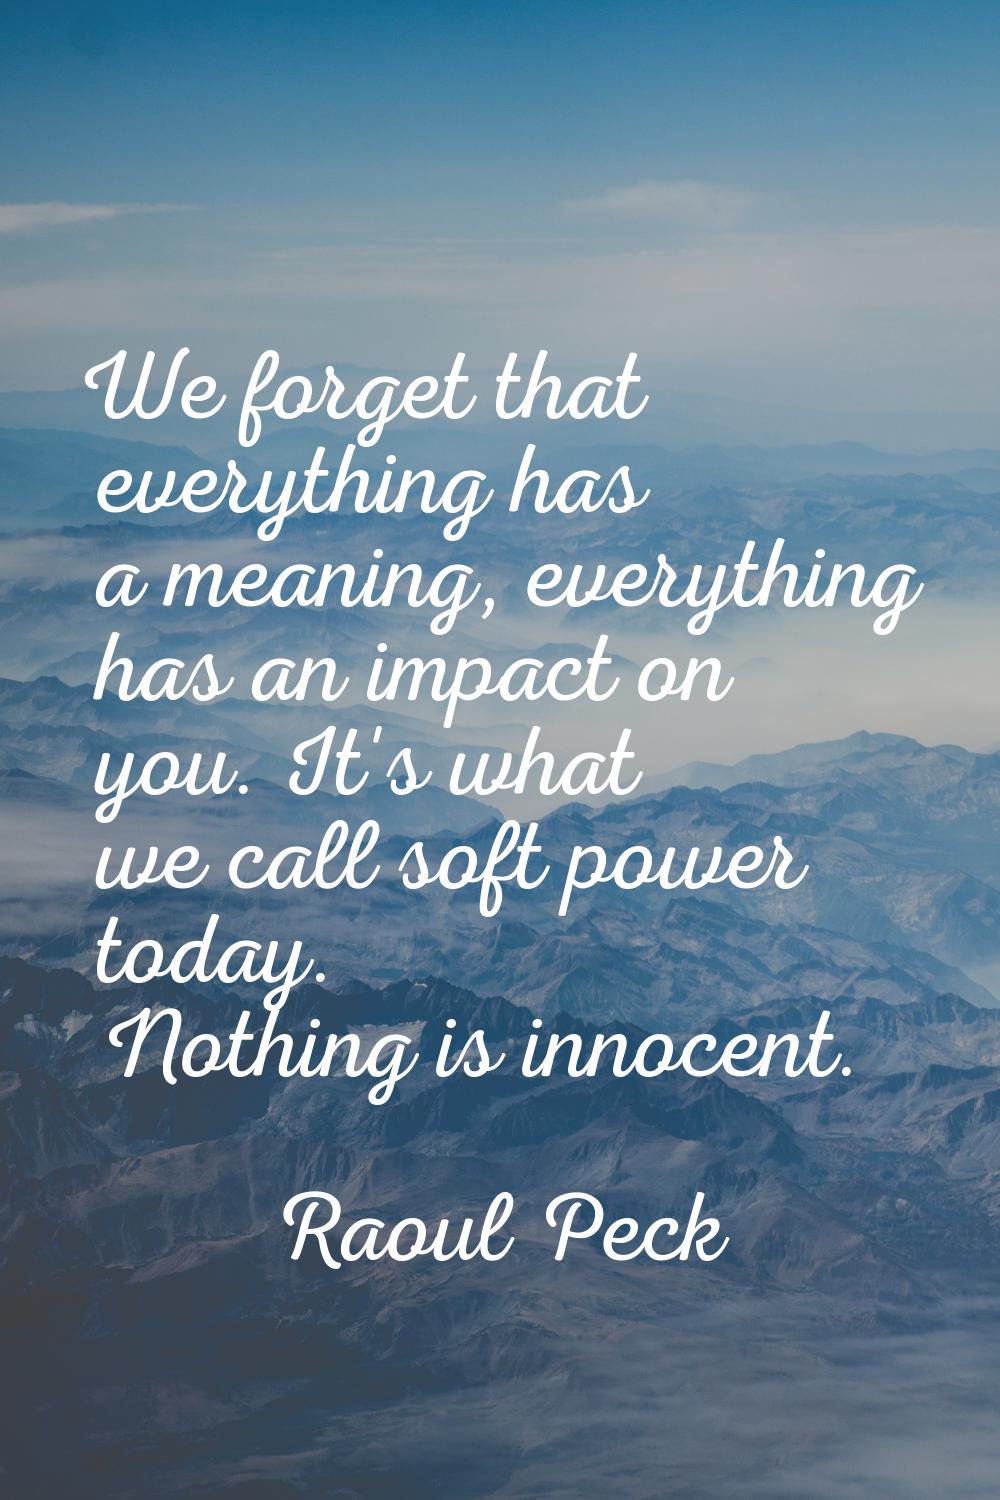 We forget that everything has a meaning, everything has an impact on you. It's what we call soft po